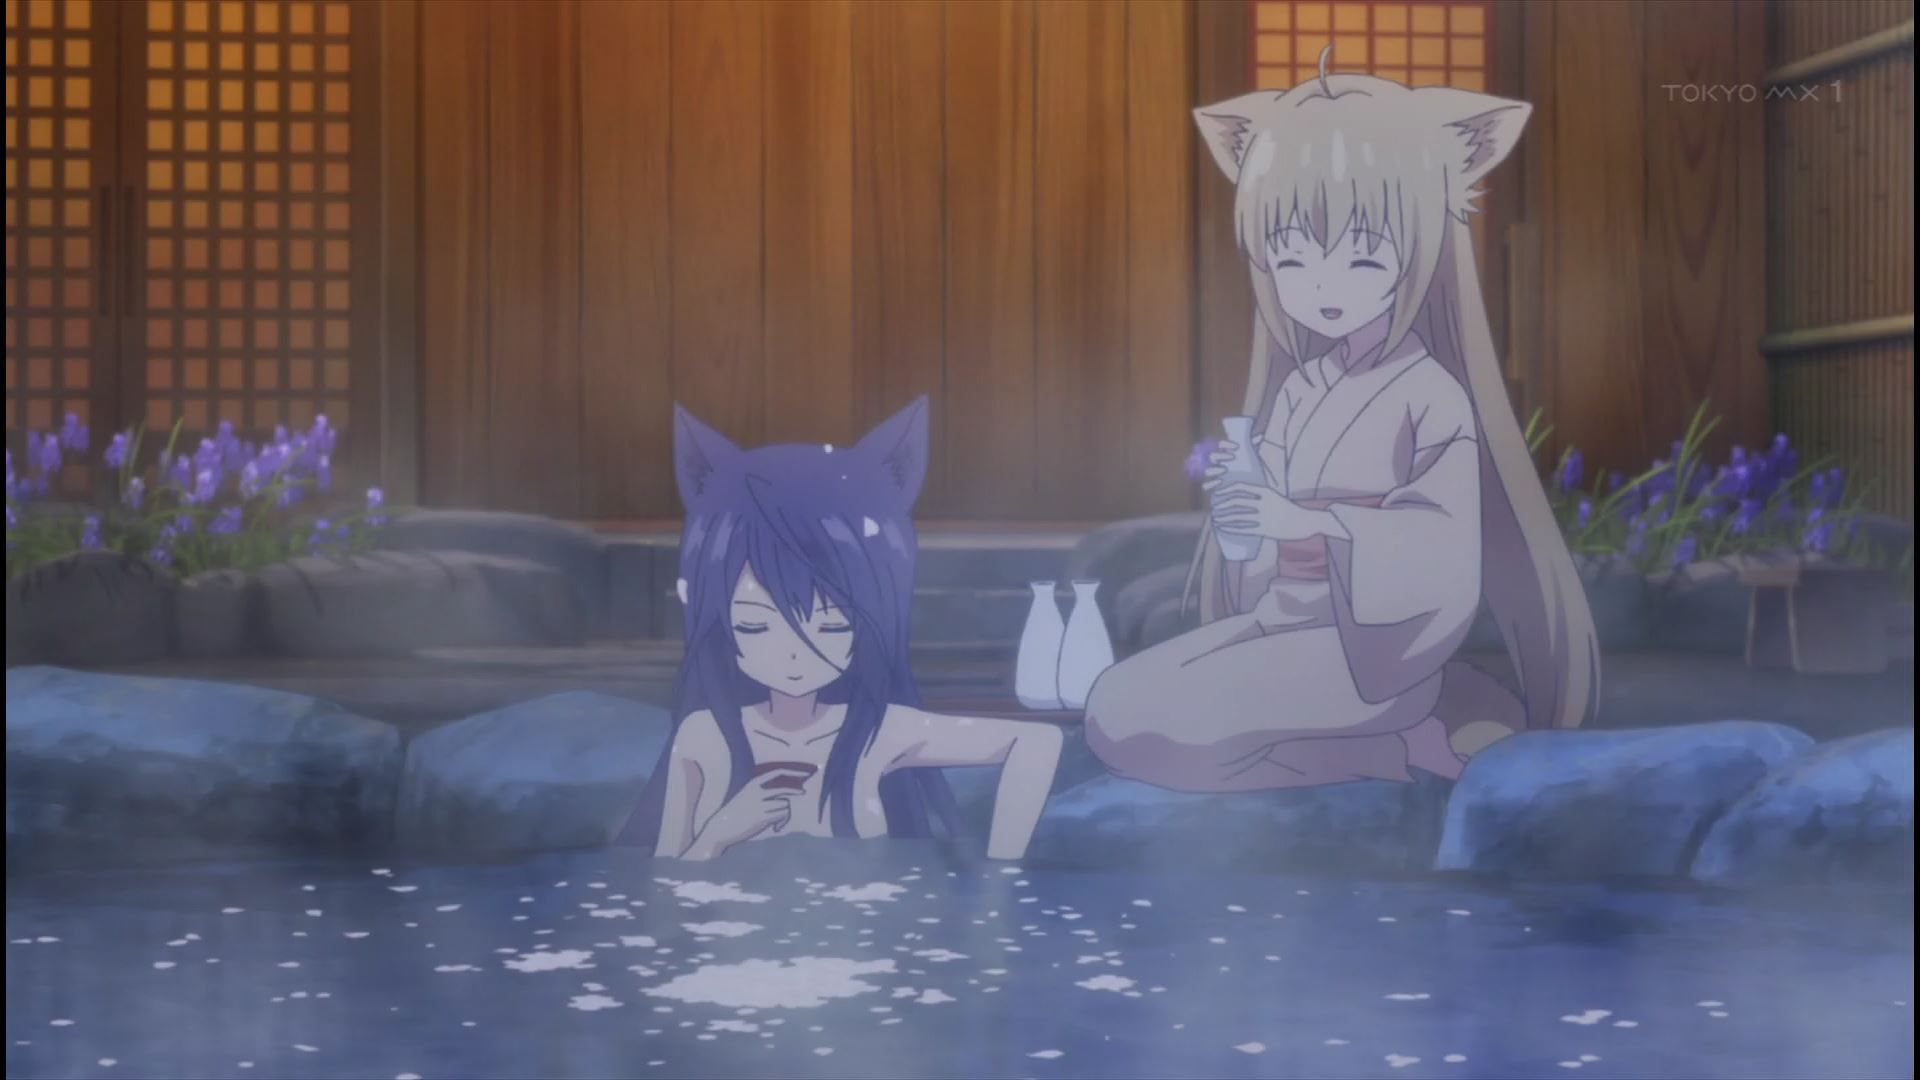 Anime [This is problem sexy erotic bath bathing scene erotic nude figure of the girl in 2 story]! 9